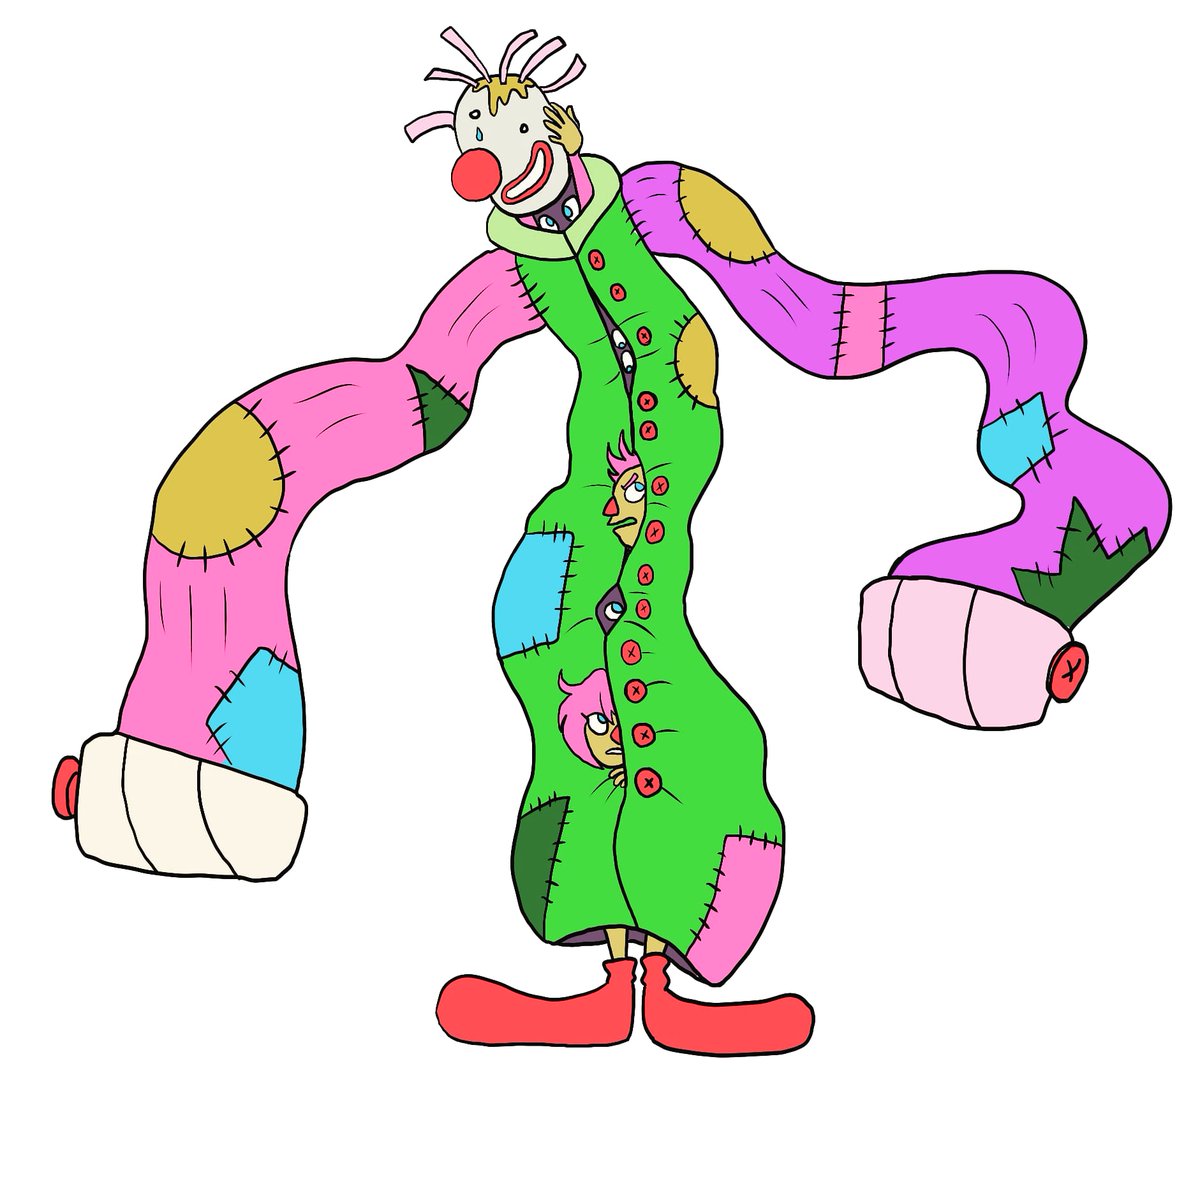 #honktober day 8! This is Wiggles, who is a clown. If he had a group of clowns inside of him, they would be the Quip siblings who belong to the Eggluck house.Wiggles doesn't have clowns inside of him, that would be silly
#inktober2020 #drawtober2020 #drawtober #drawloween2020